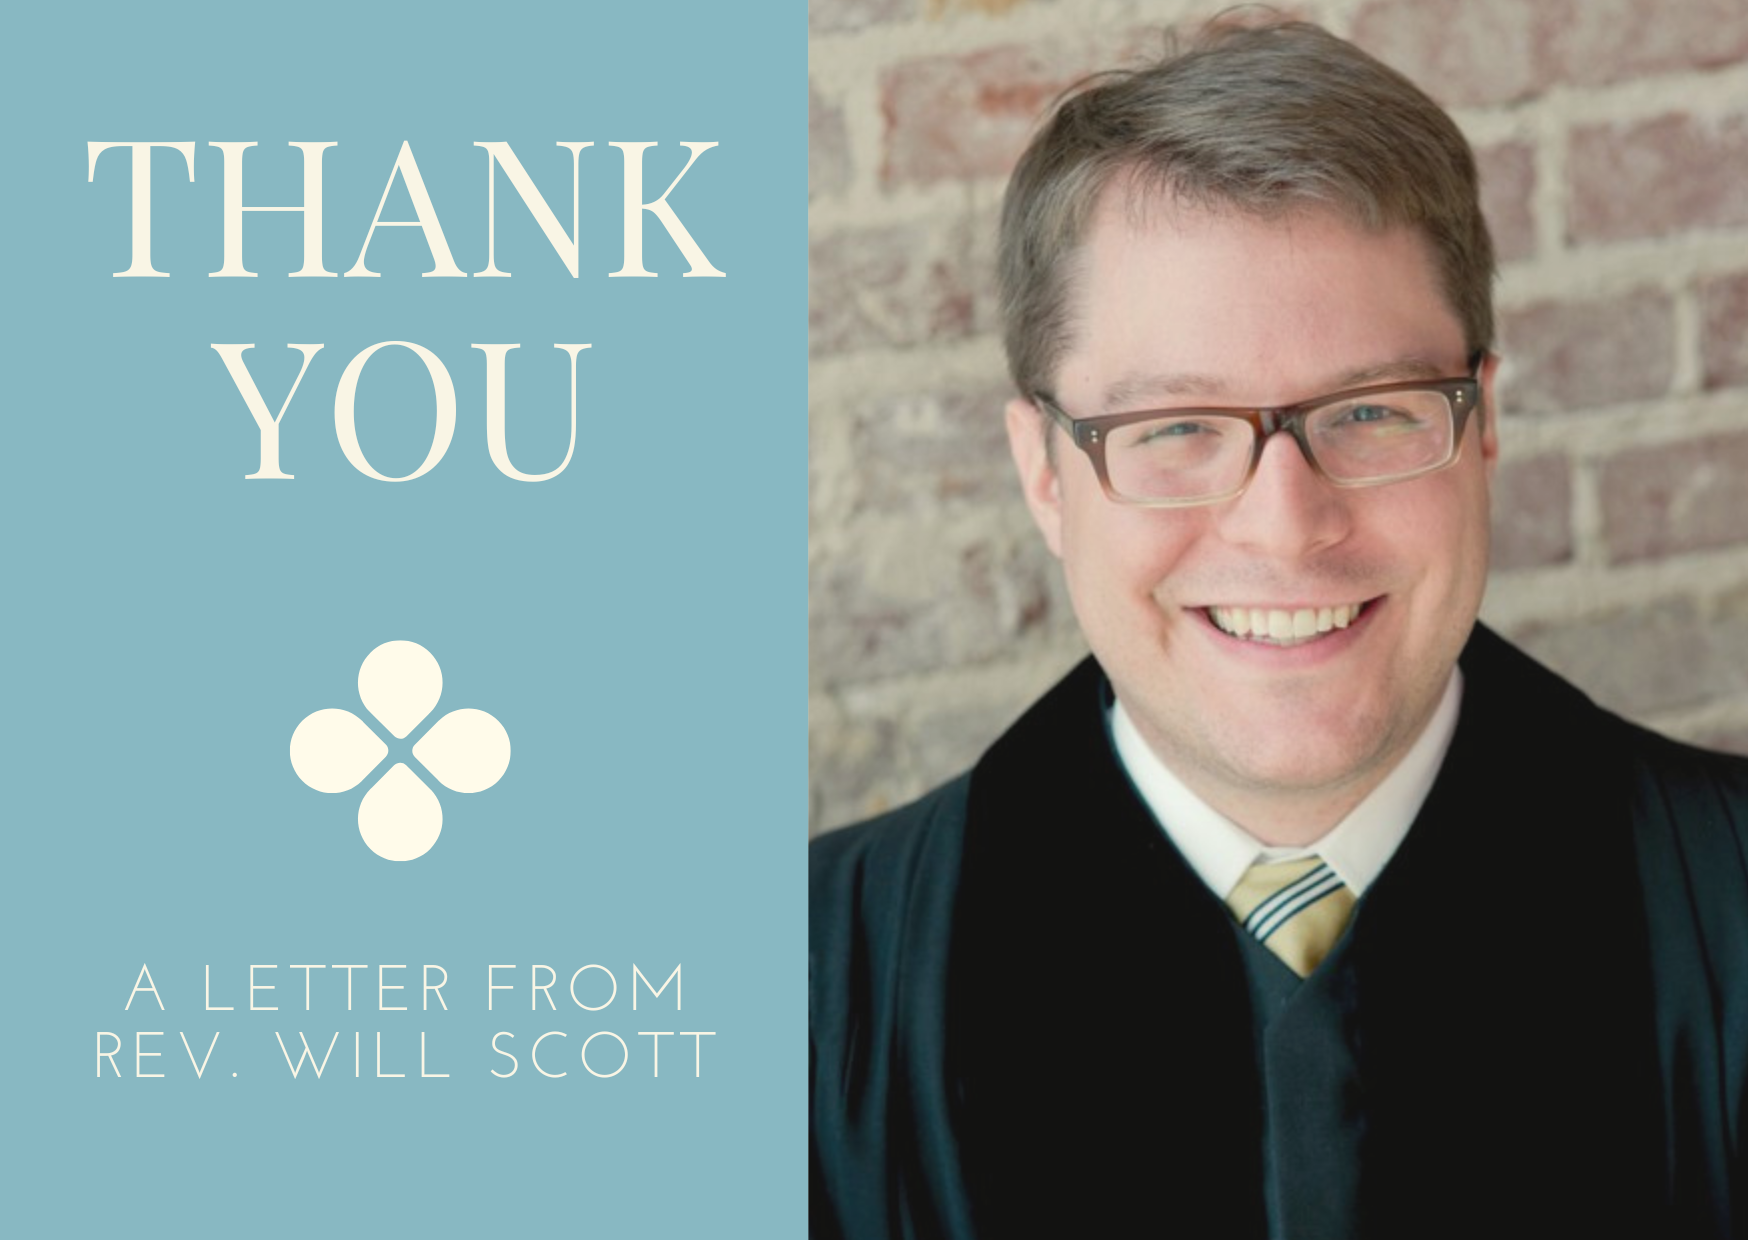 Thank You – A Letter from Rev. Will Scott